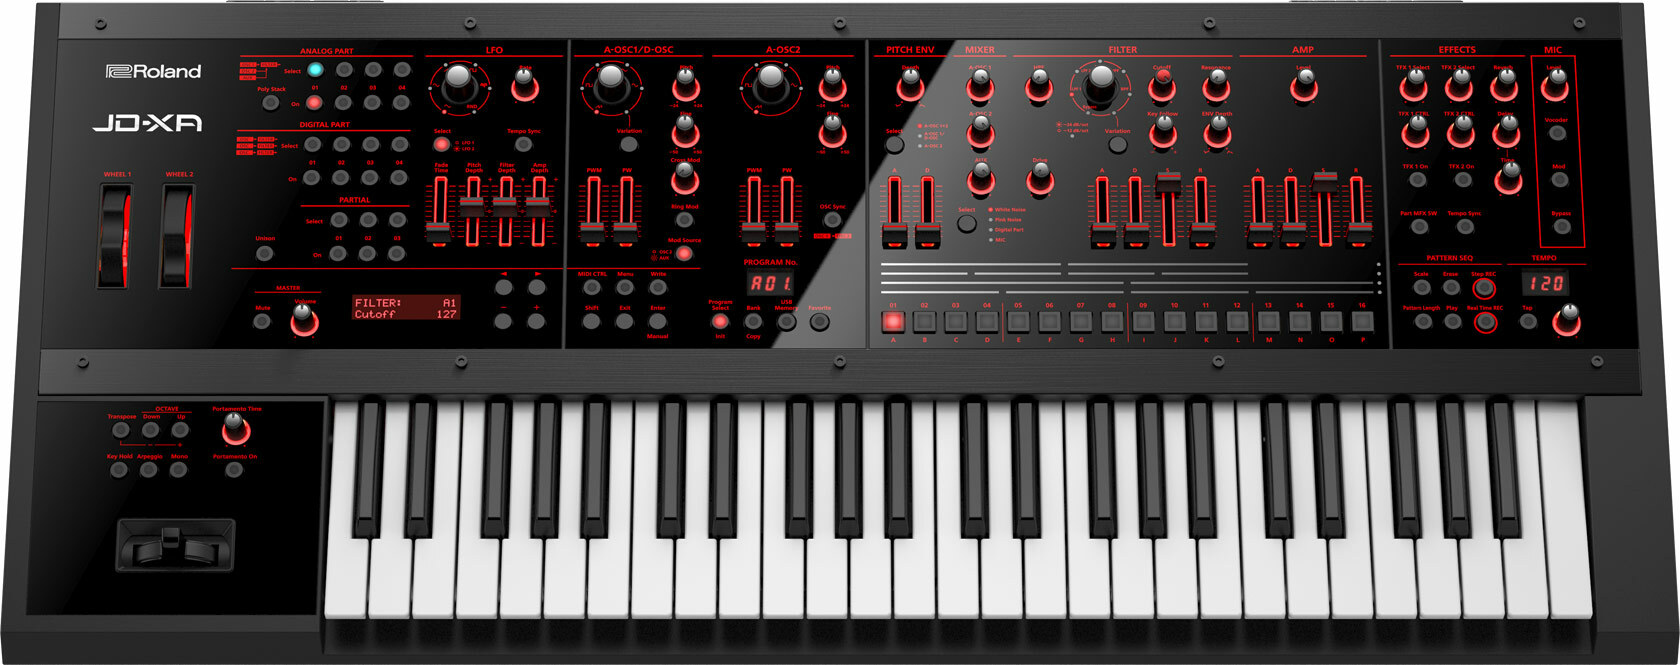 Roland Jd-xa - Synthesizer - Main picture